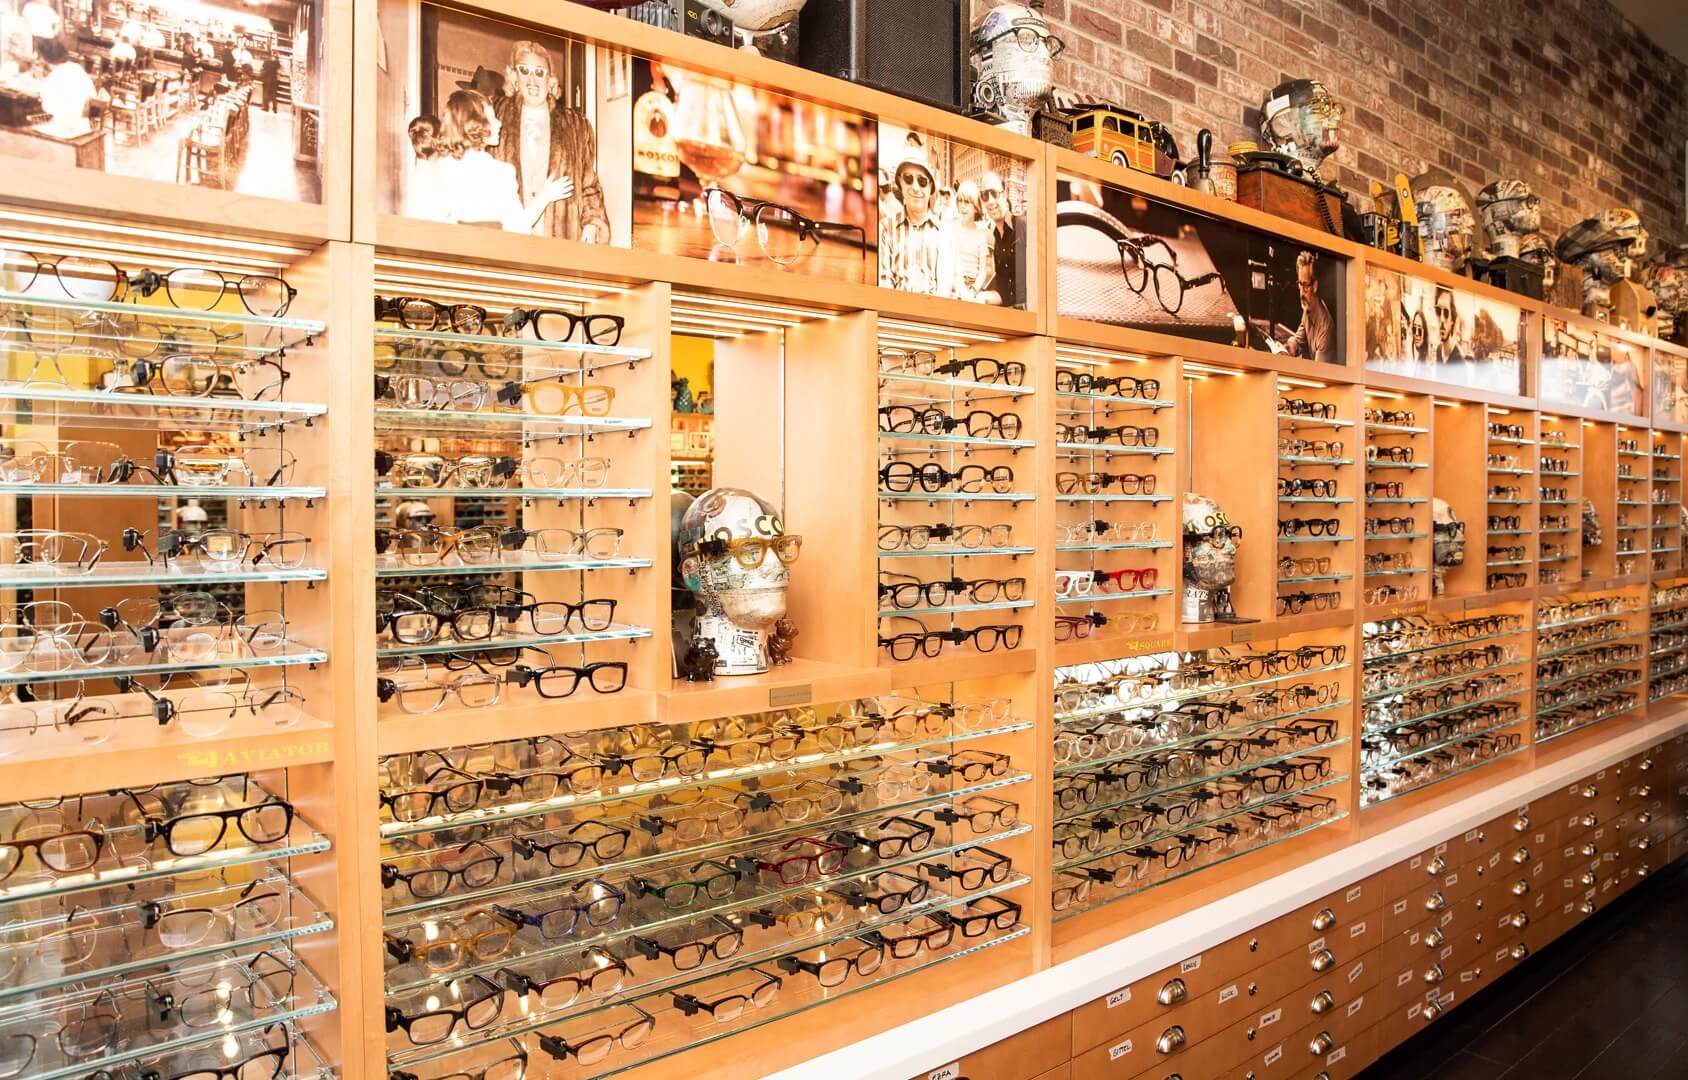 Optical brand Moscot eyes new chapter in L.A.